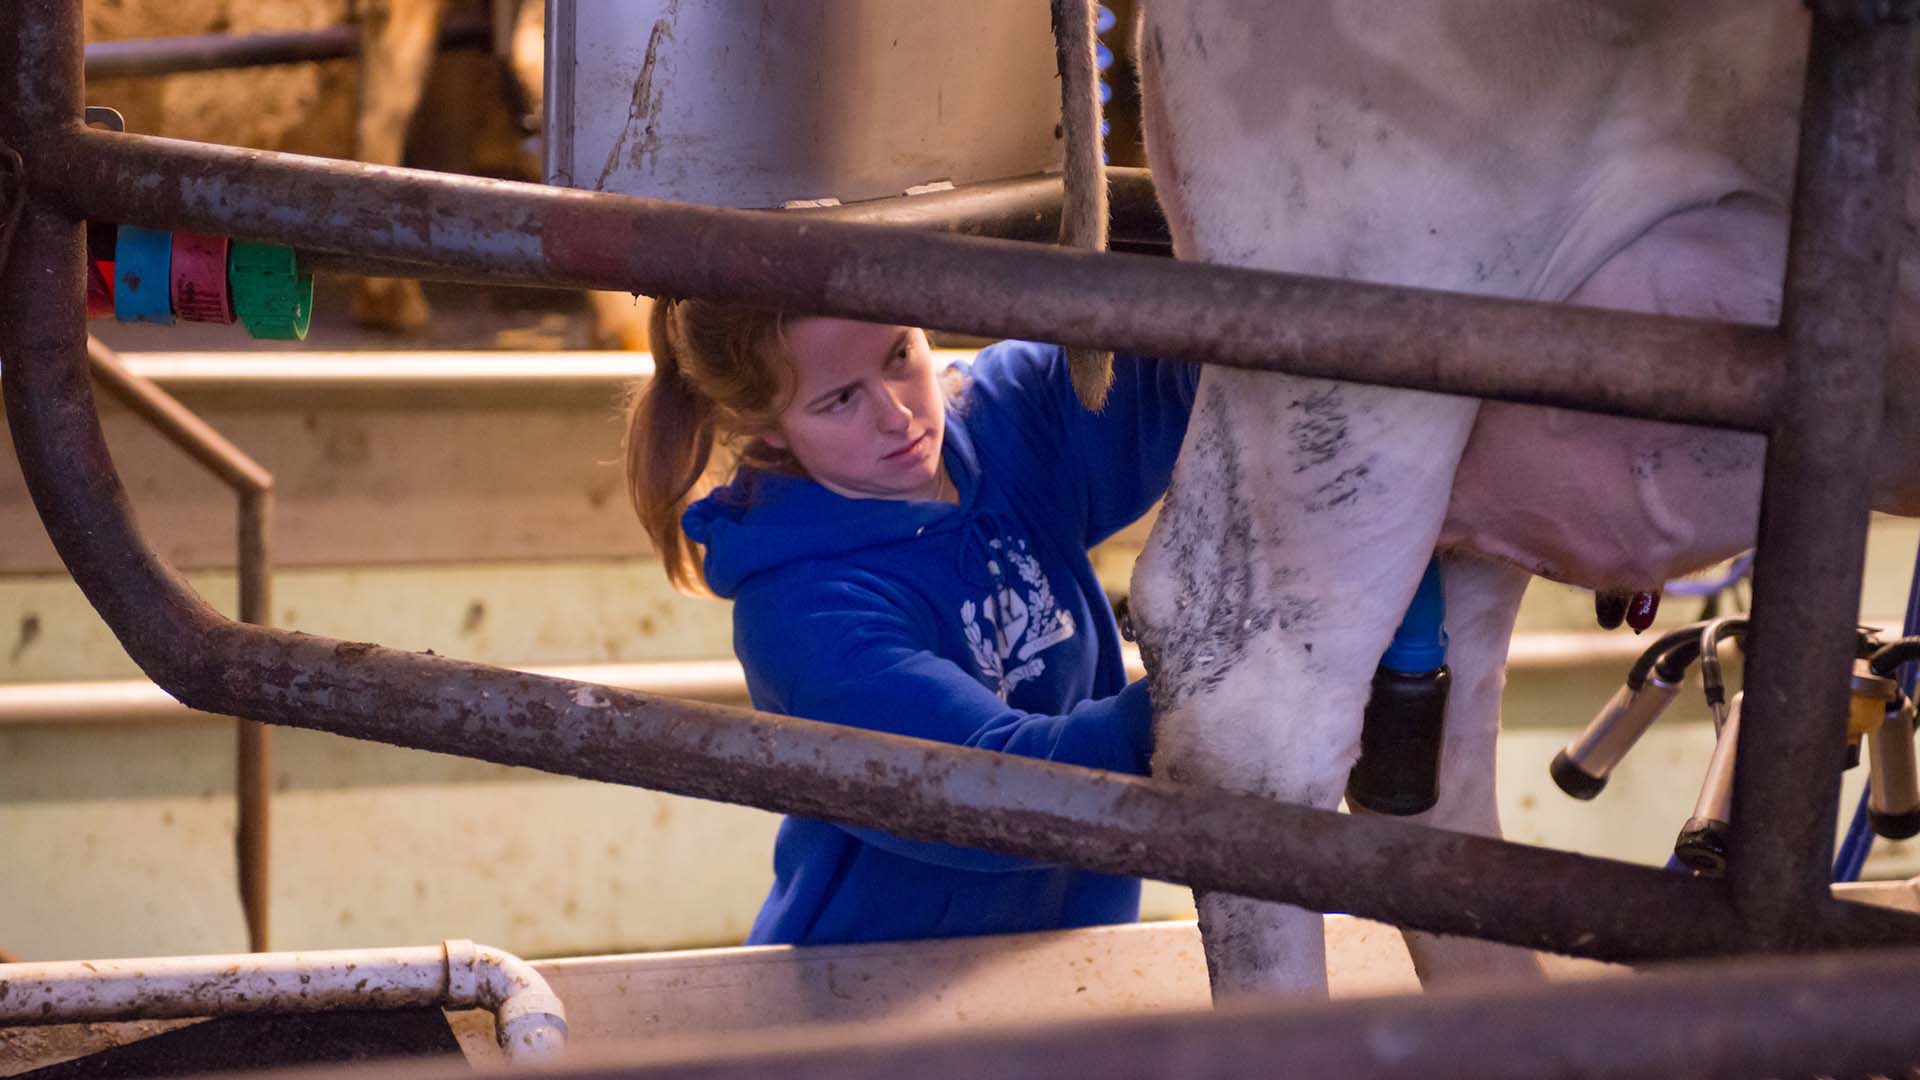 A COLSA student milks cows at the Fairchild Dairy Research Center